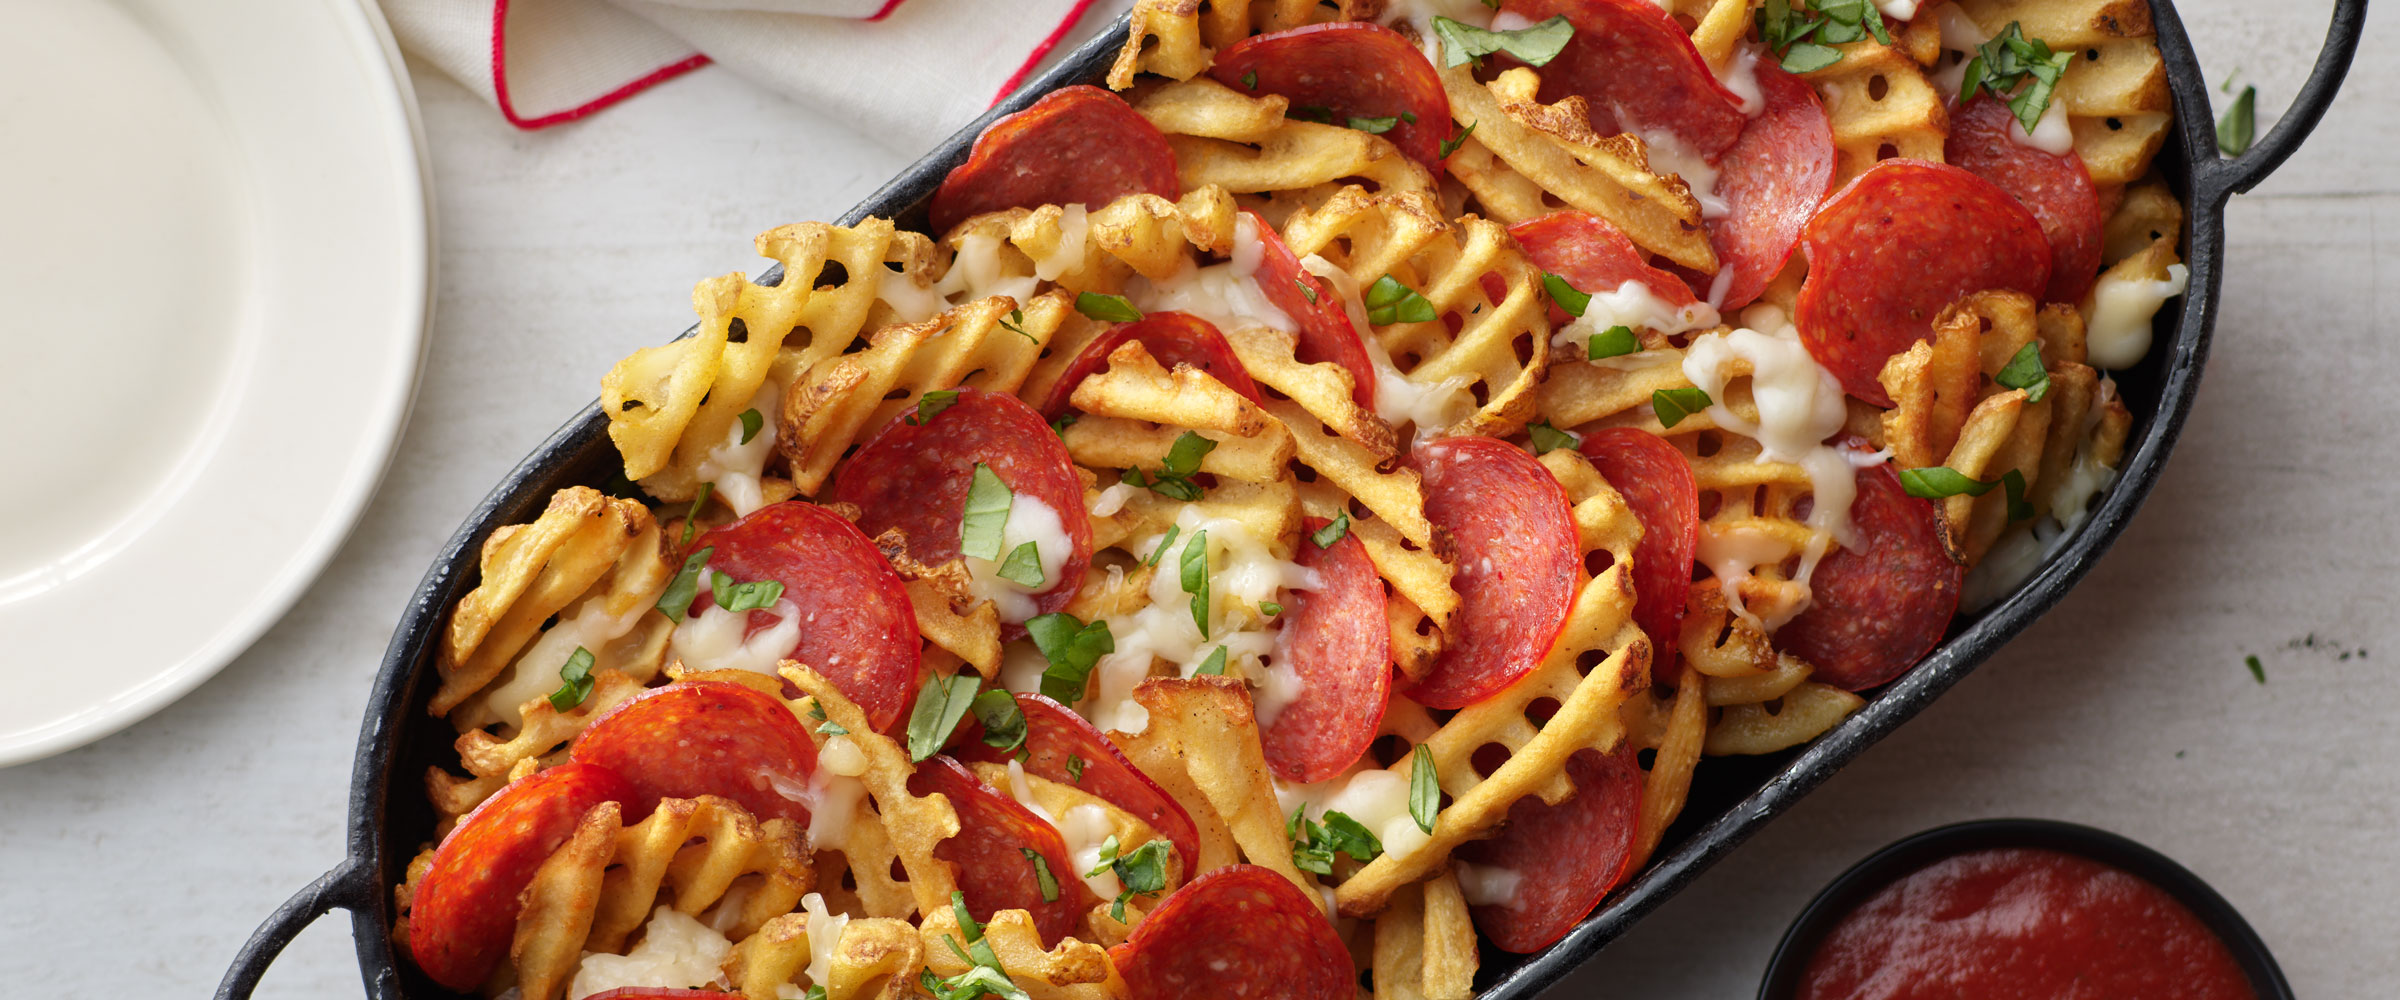 Pizza waffle fries topped with pepperoni in black dish